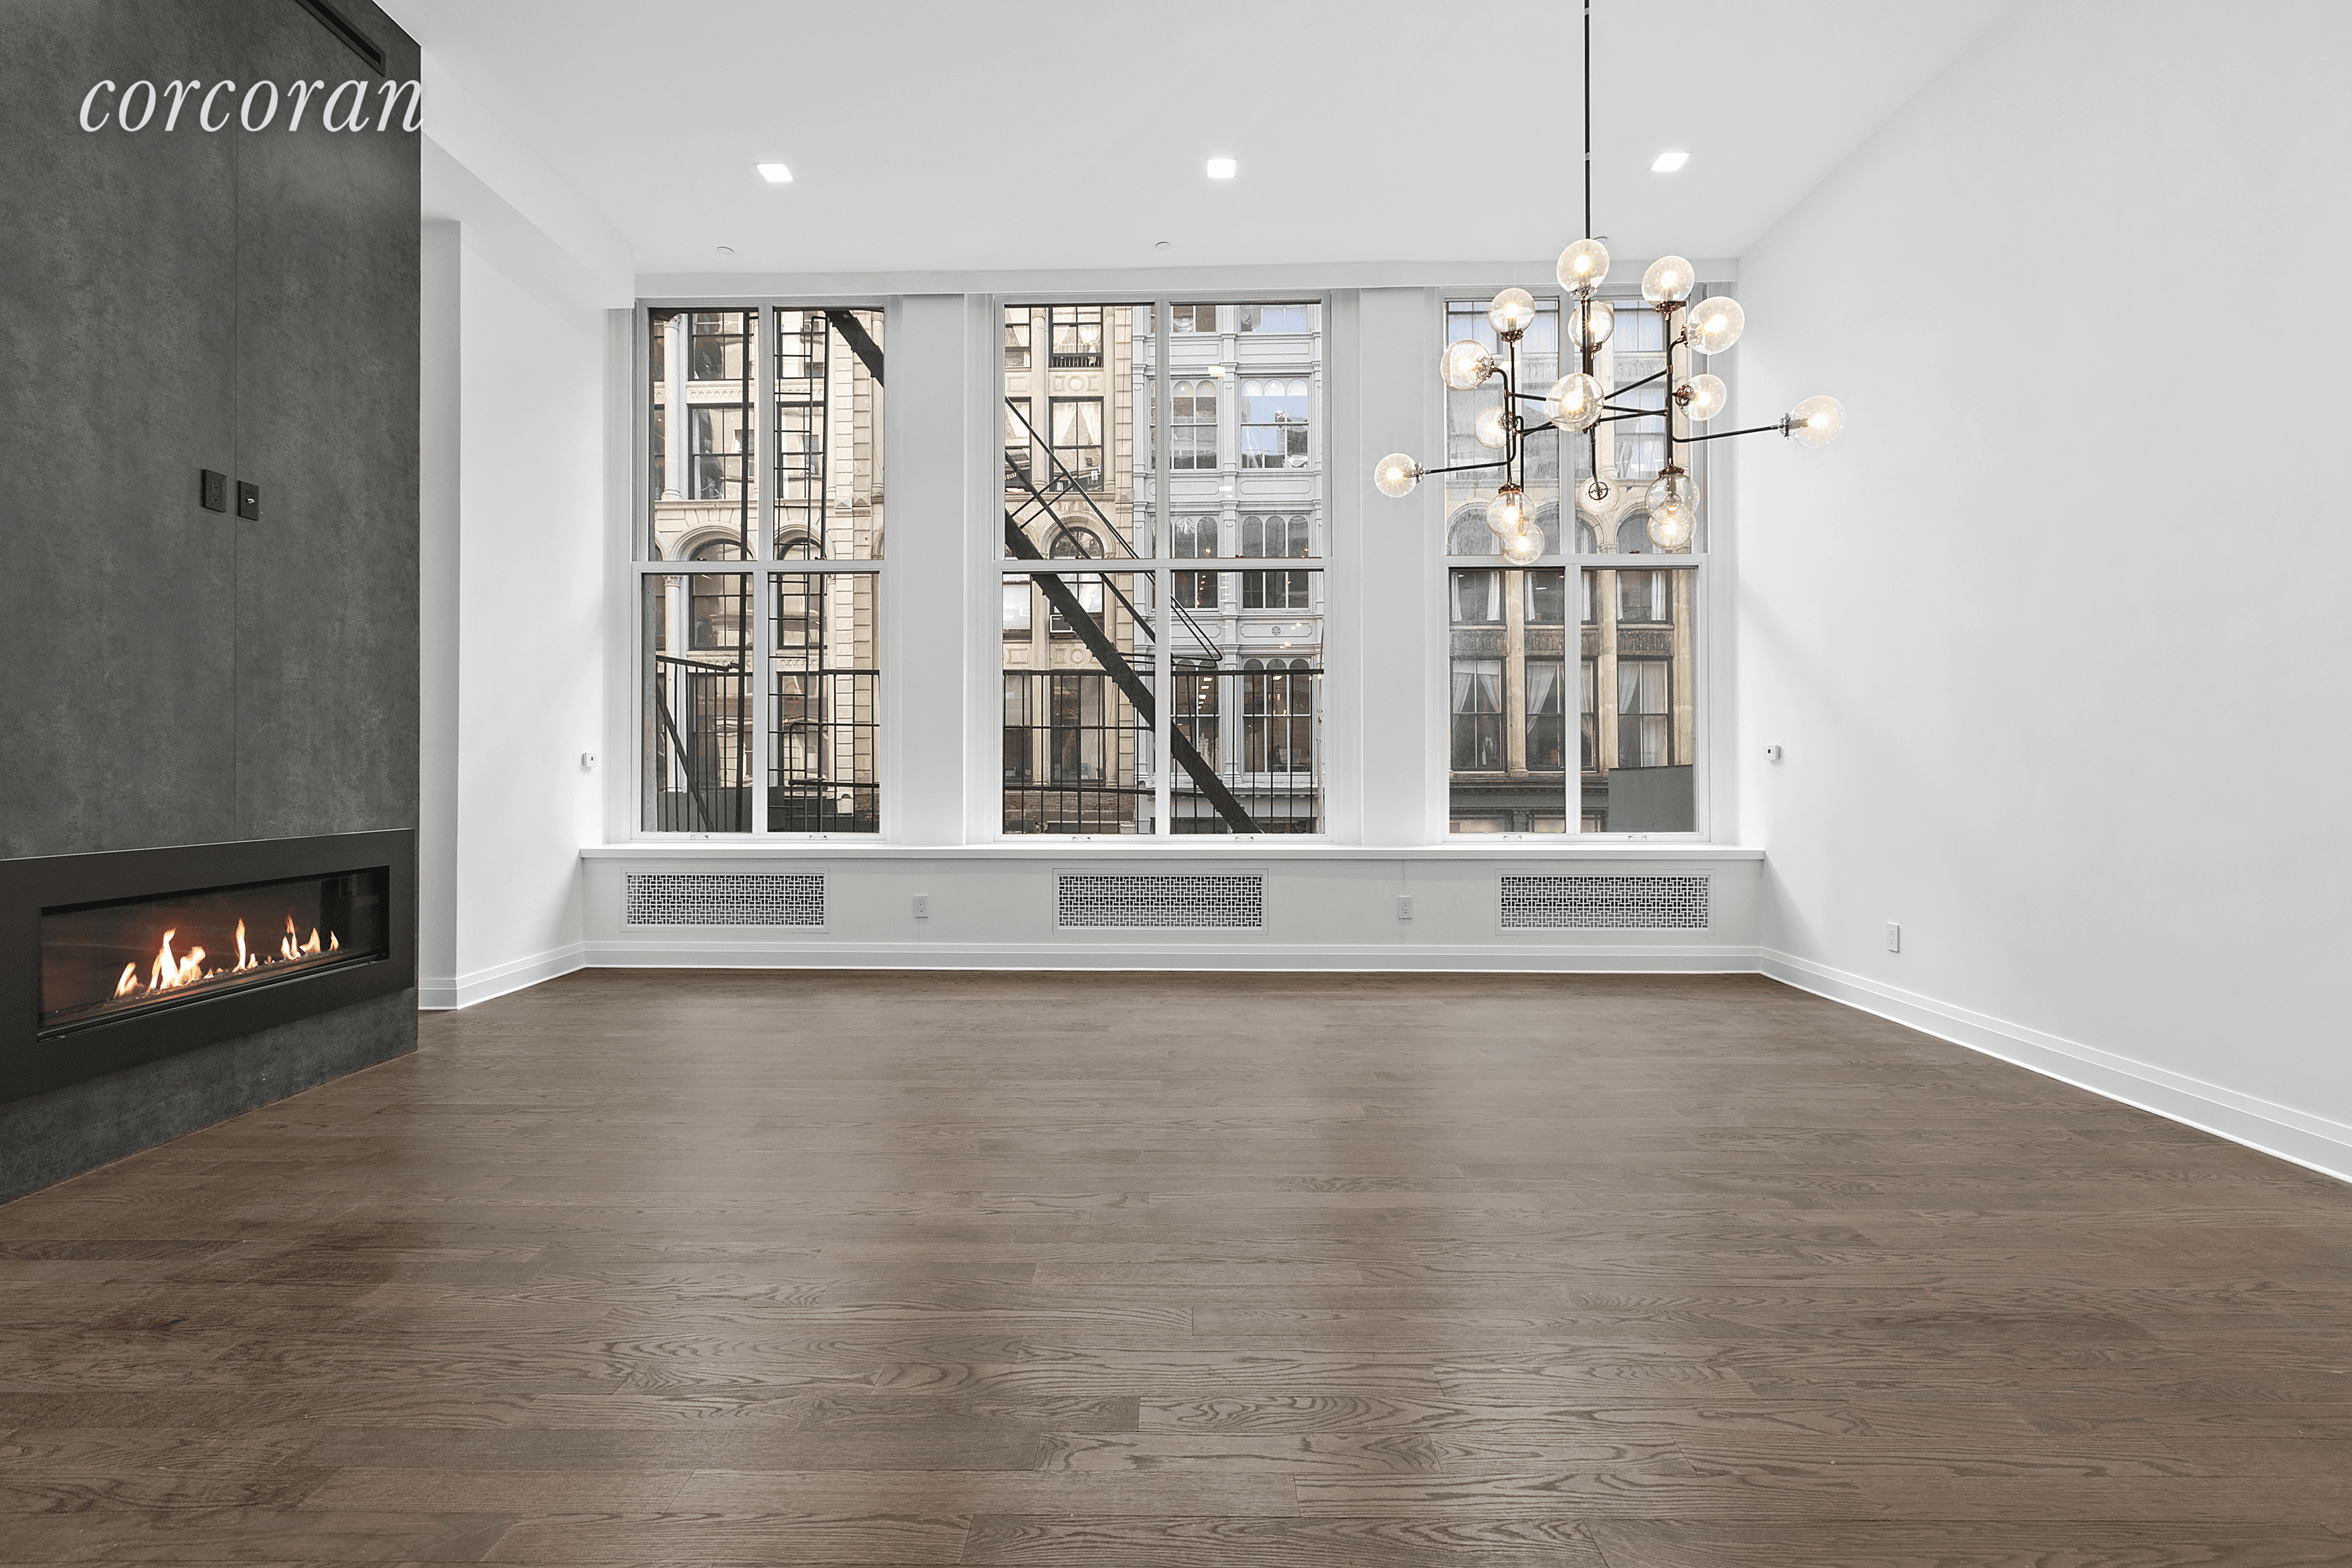 391 Broadway is an exquisite conversion of a historic cast iron Pre war loft building located in the heart of Tribeca.